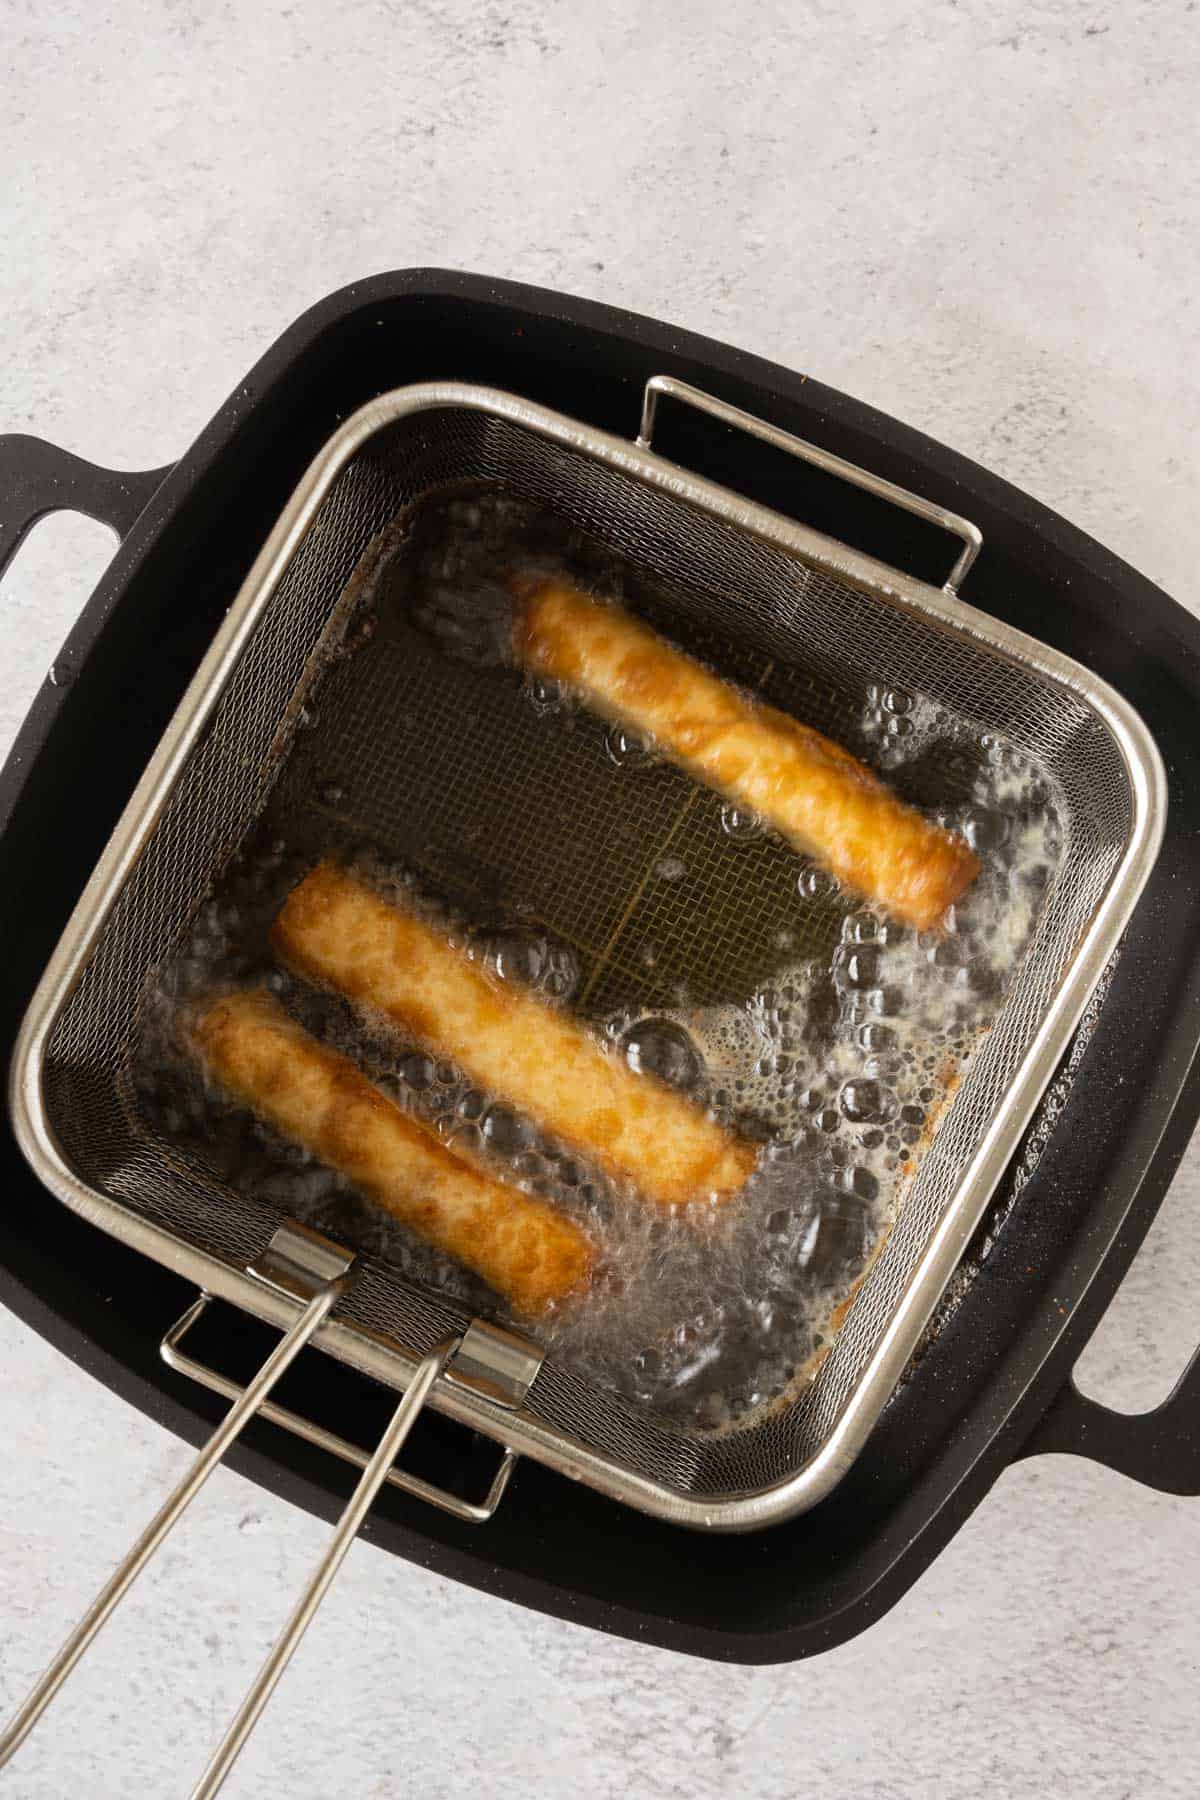 Cheese pastry rolls frying in a frying basket in oil.